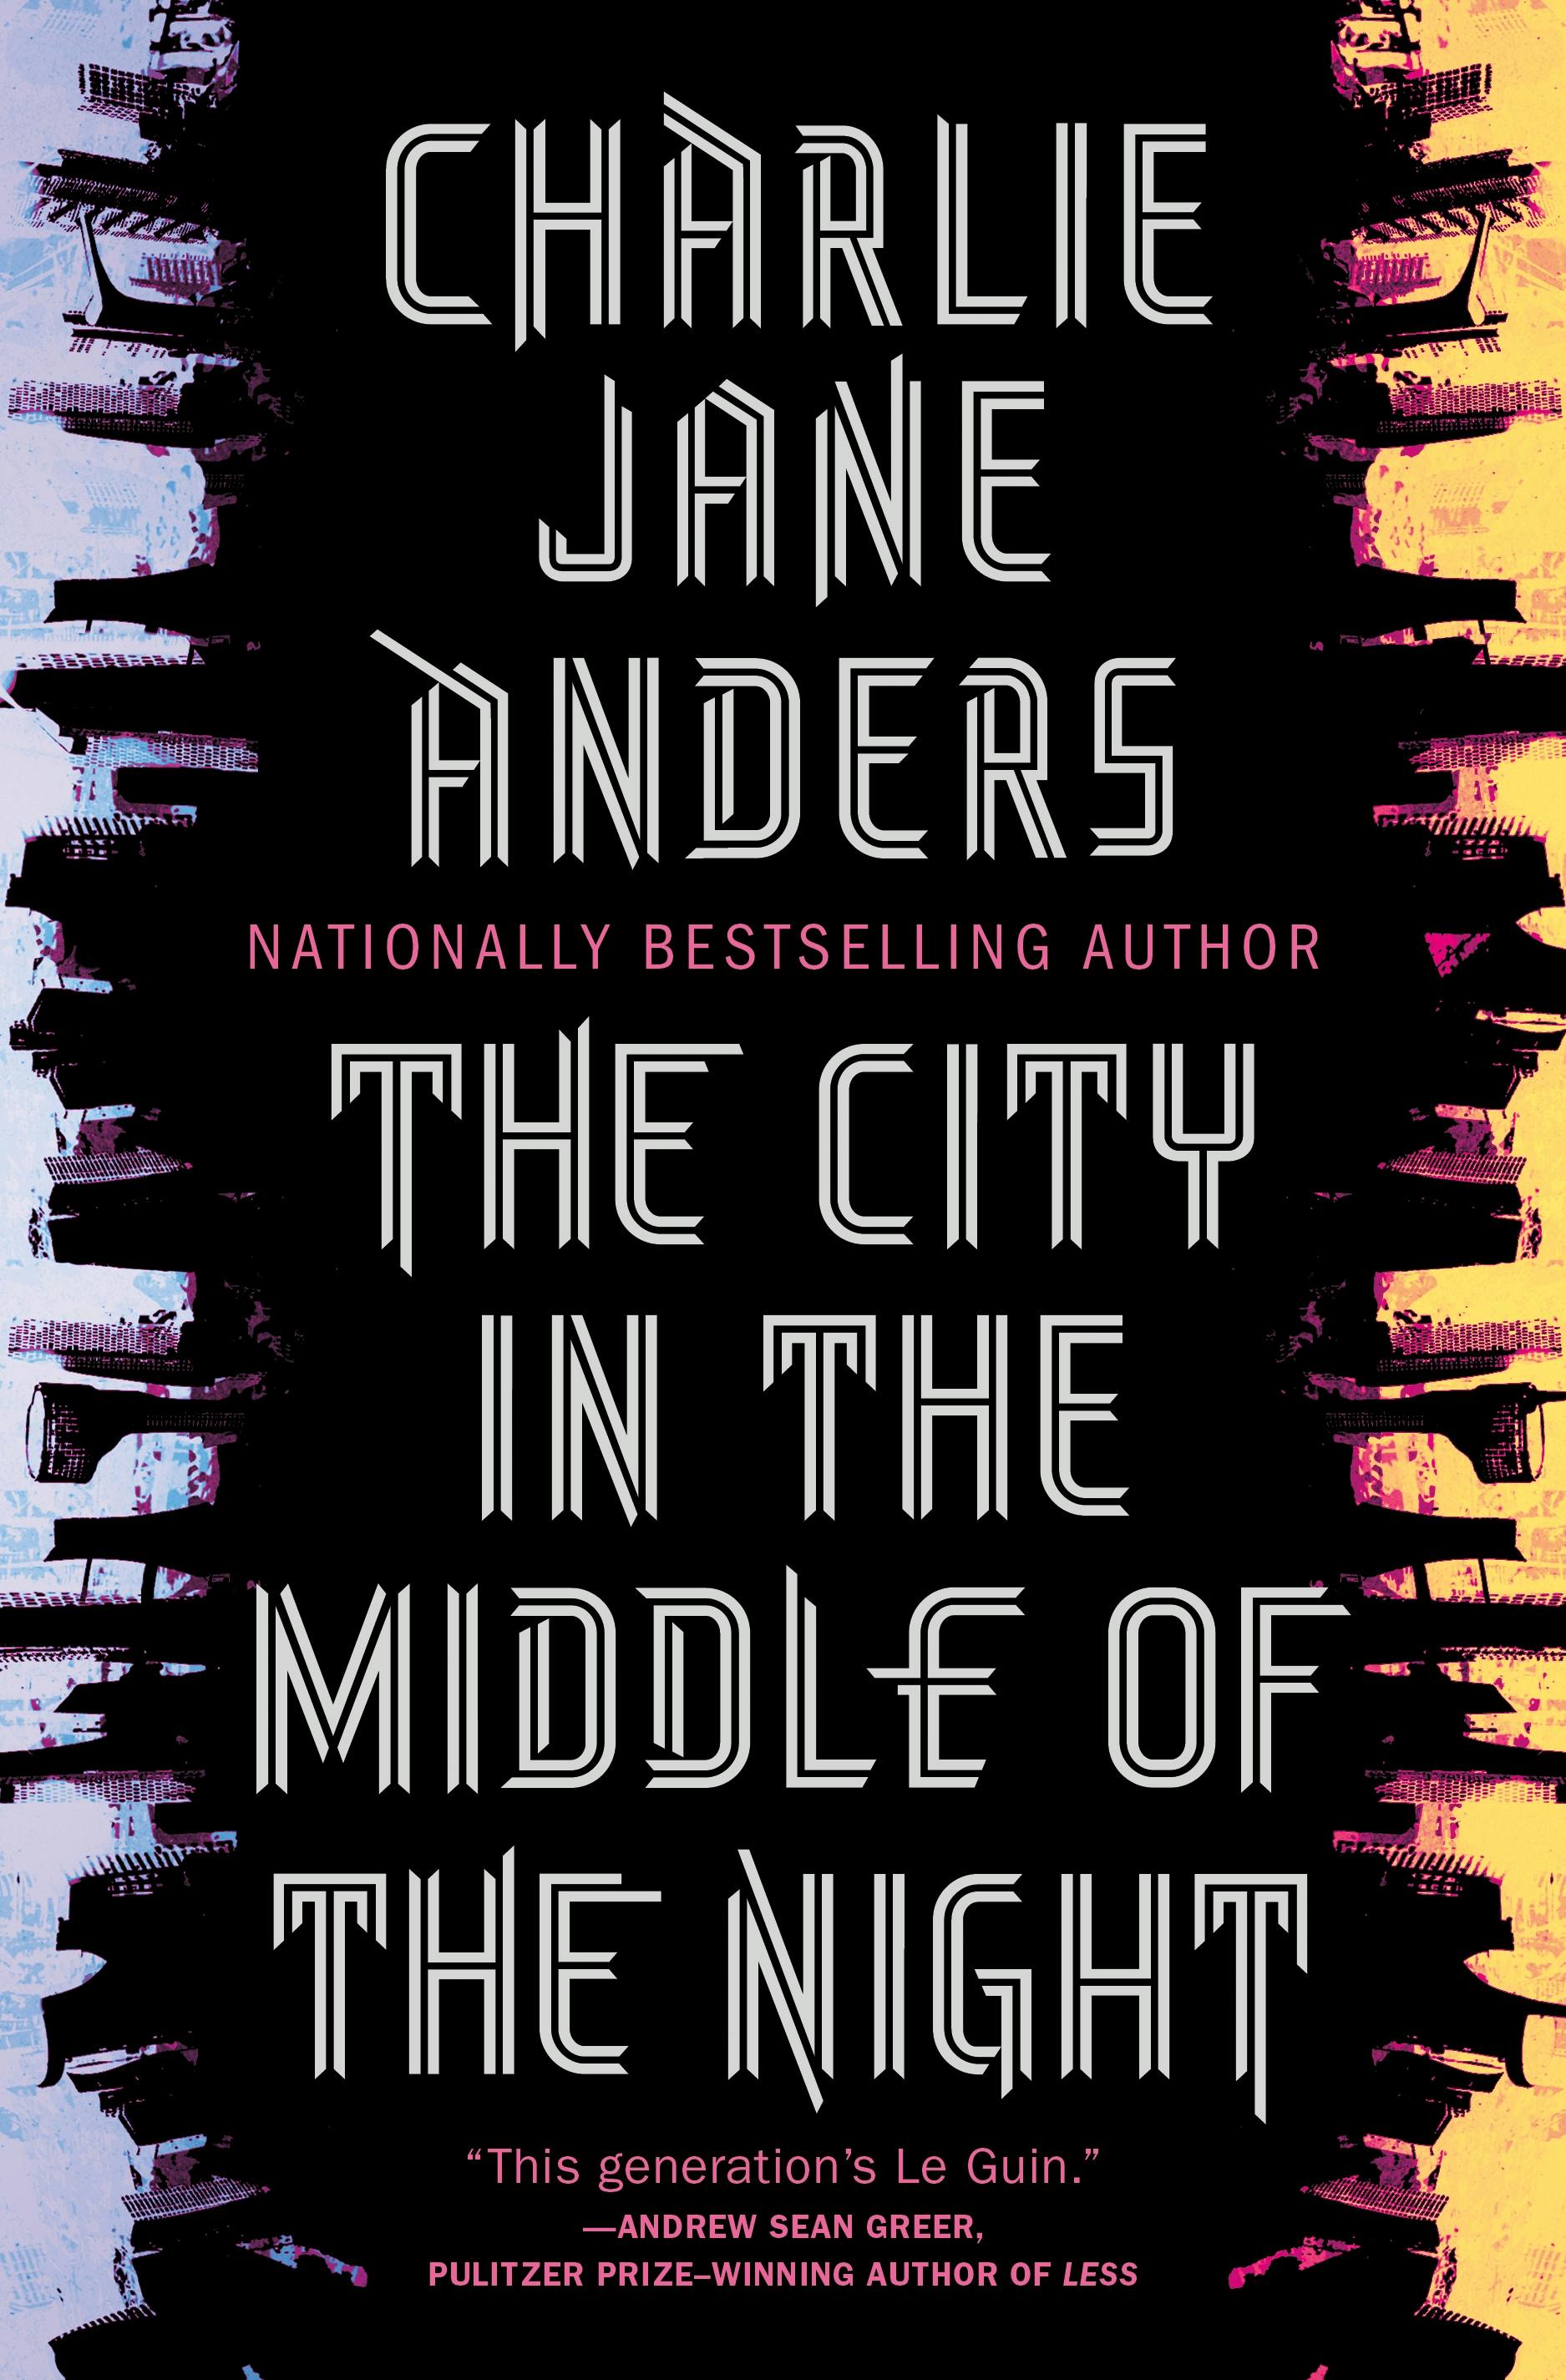 Cover for the book titled as: The City in the Middle of the Night